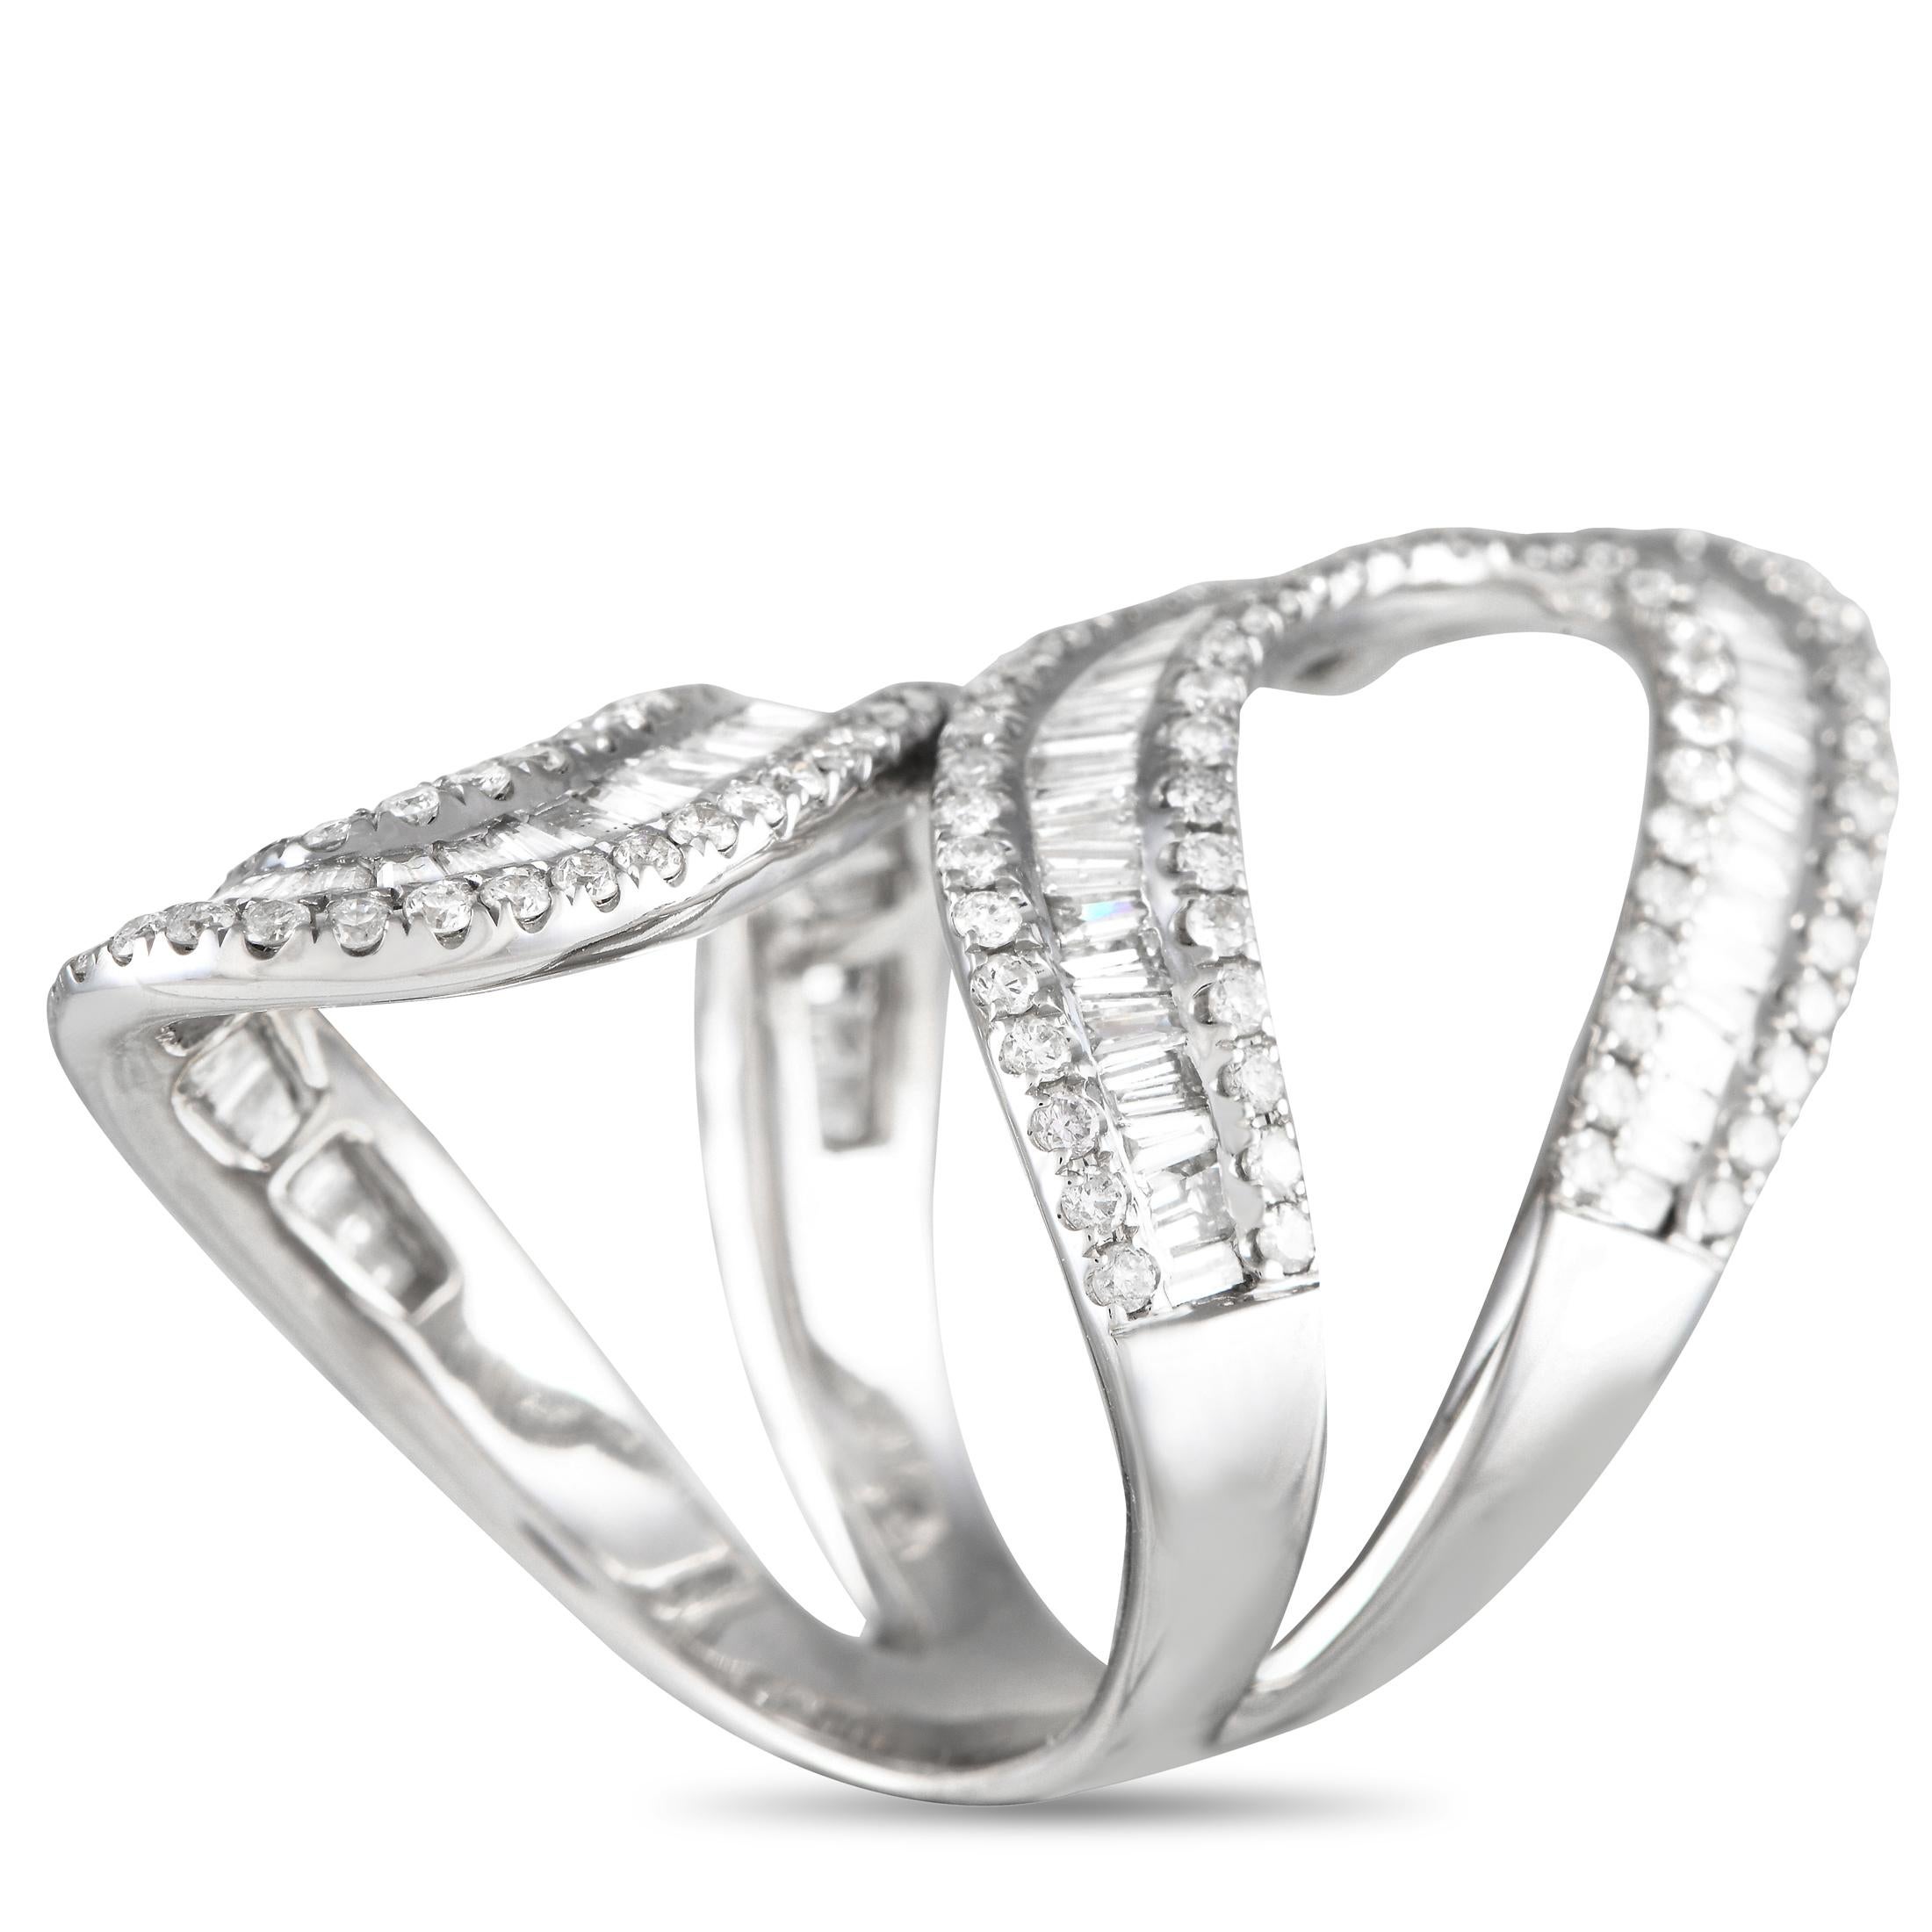 A delightful bauble to help you elevate your style in an instant. This shapely ring in 14K white gold features a swirling split band design to wrap the finger in elegance. The ribbon-like silhouette of the band showcases three rows of diamonds, with